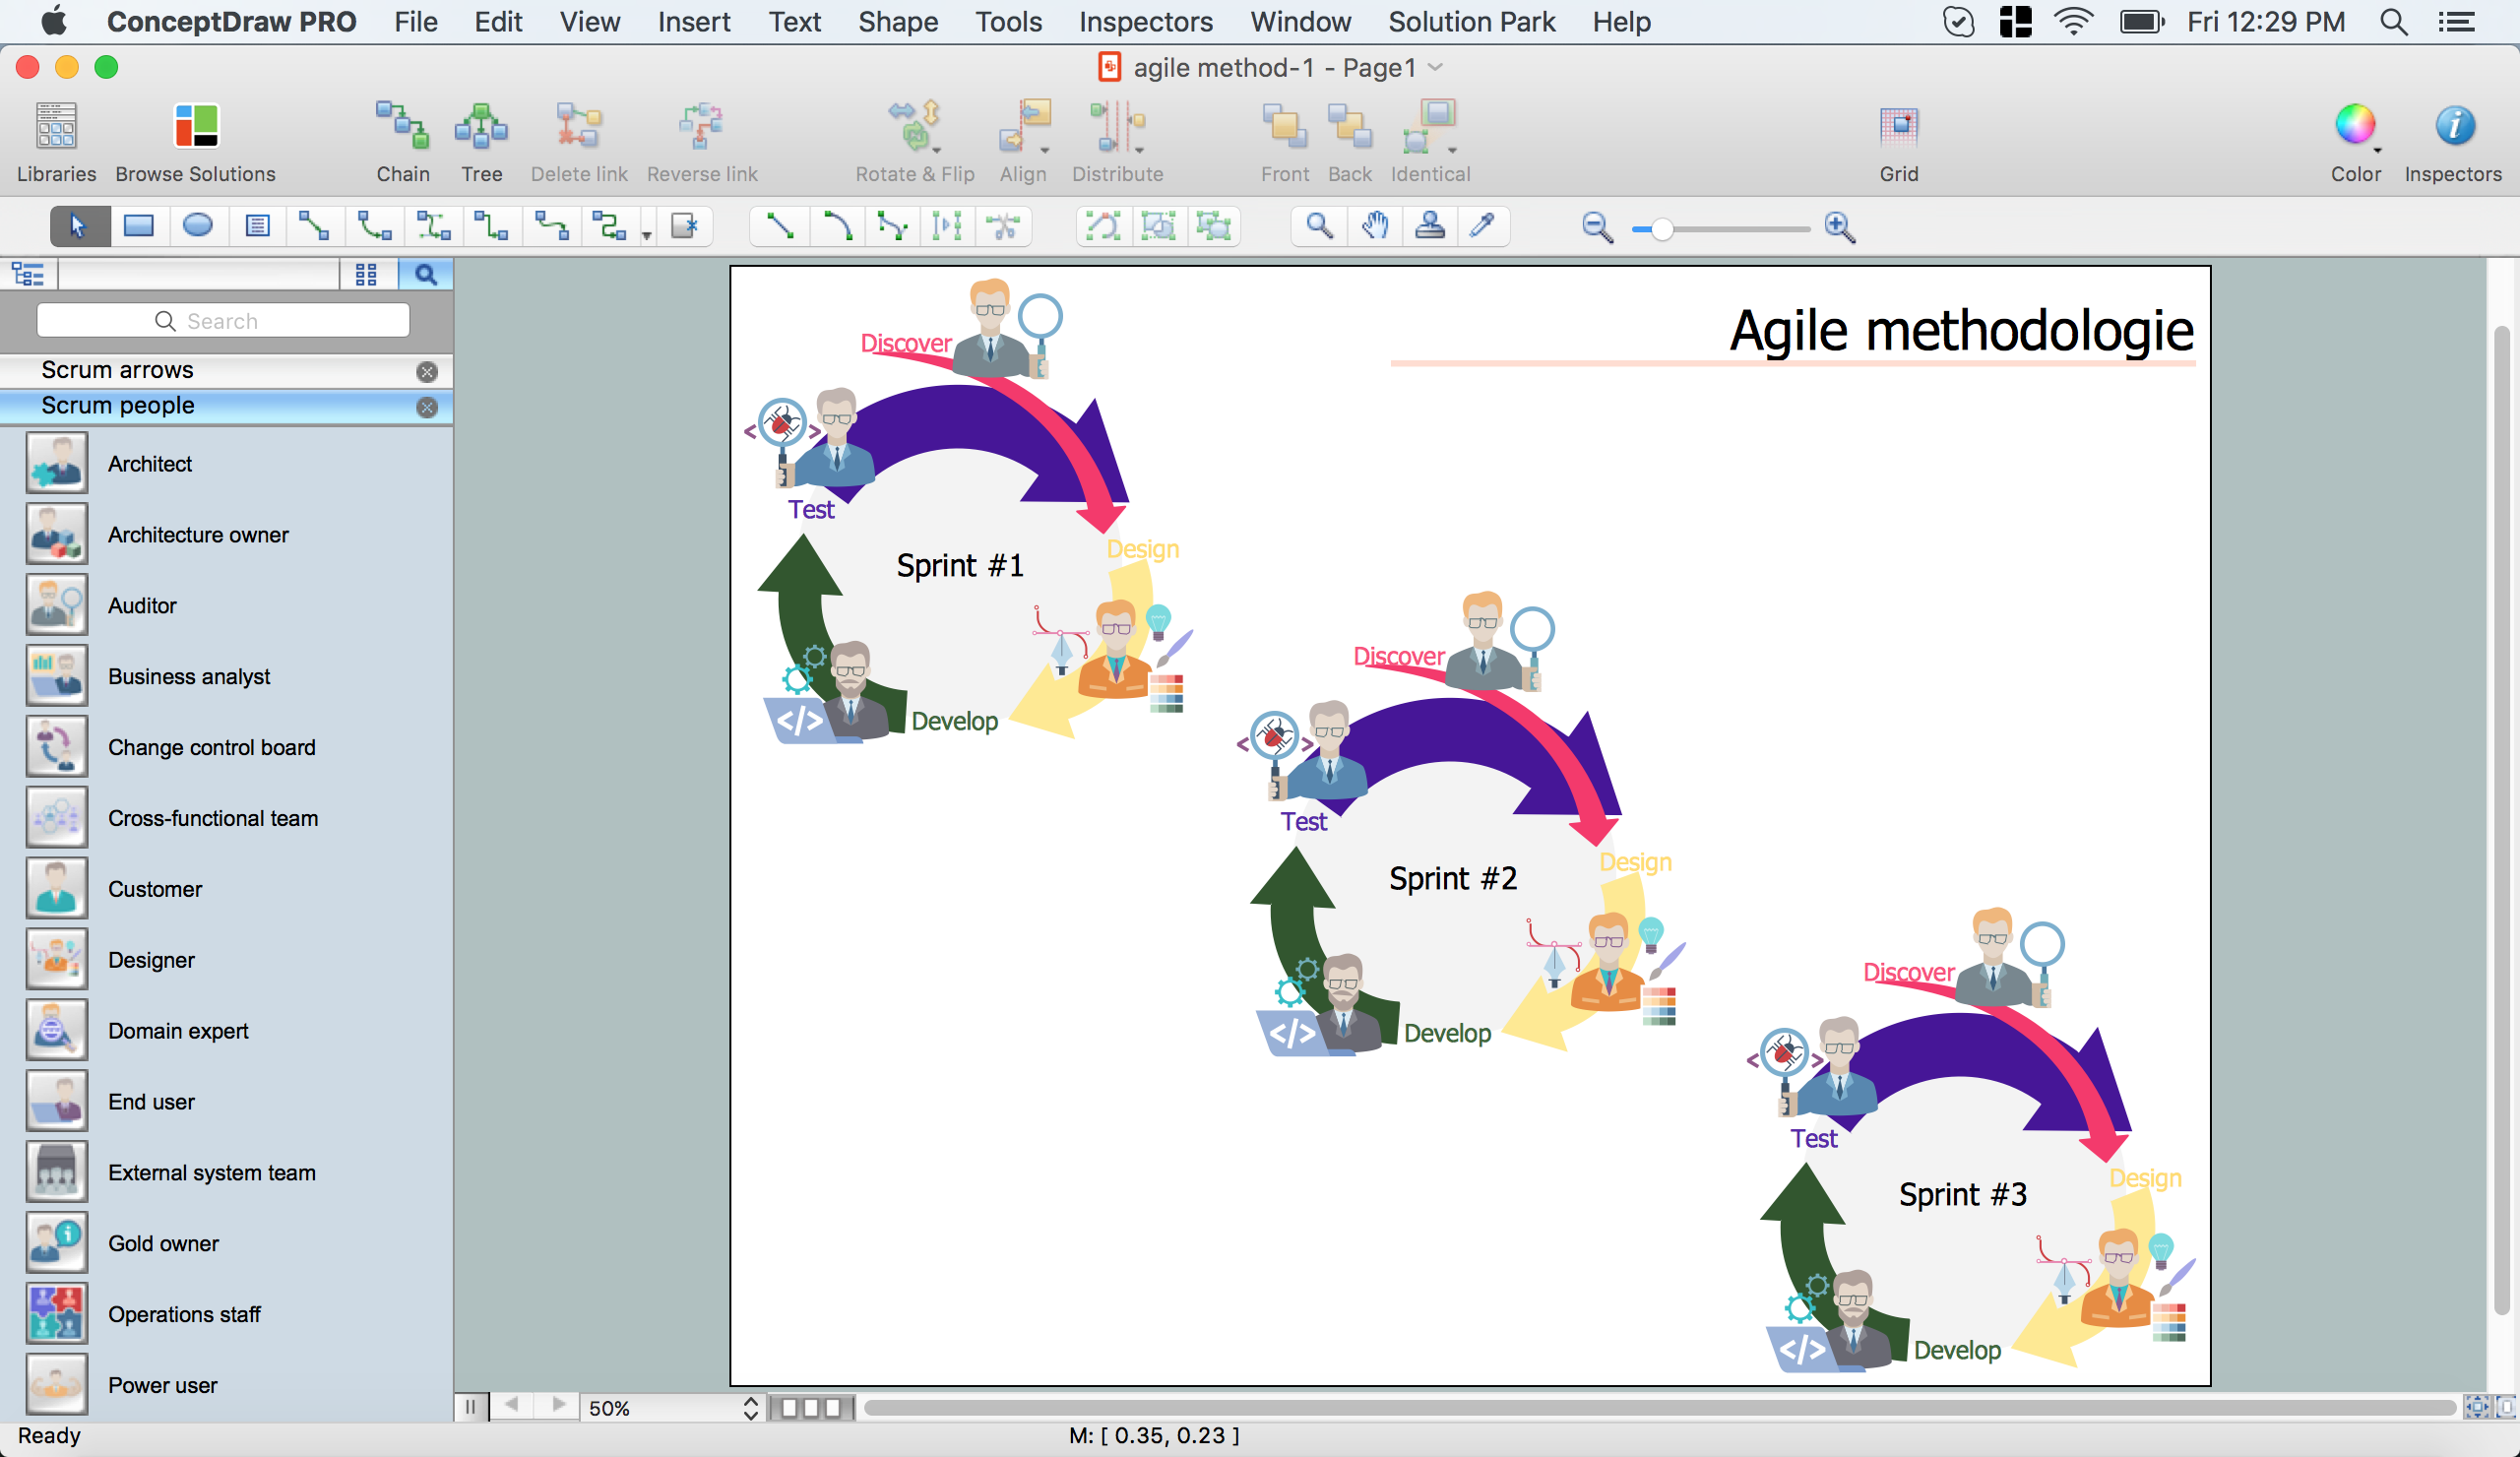 Agile Methodology in ConceptDraw DIAGRAM  title=